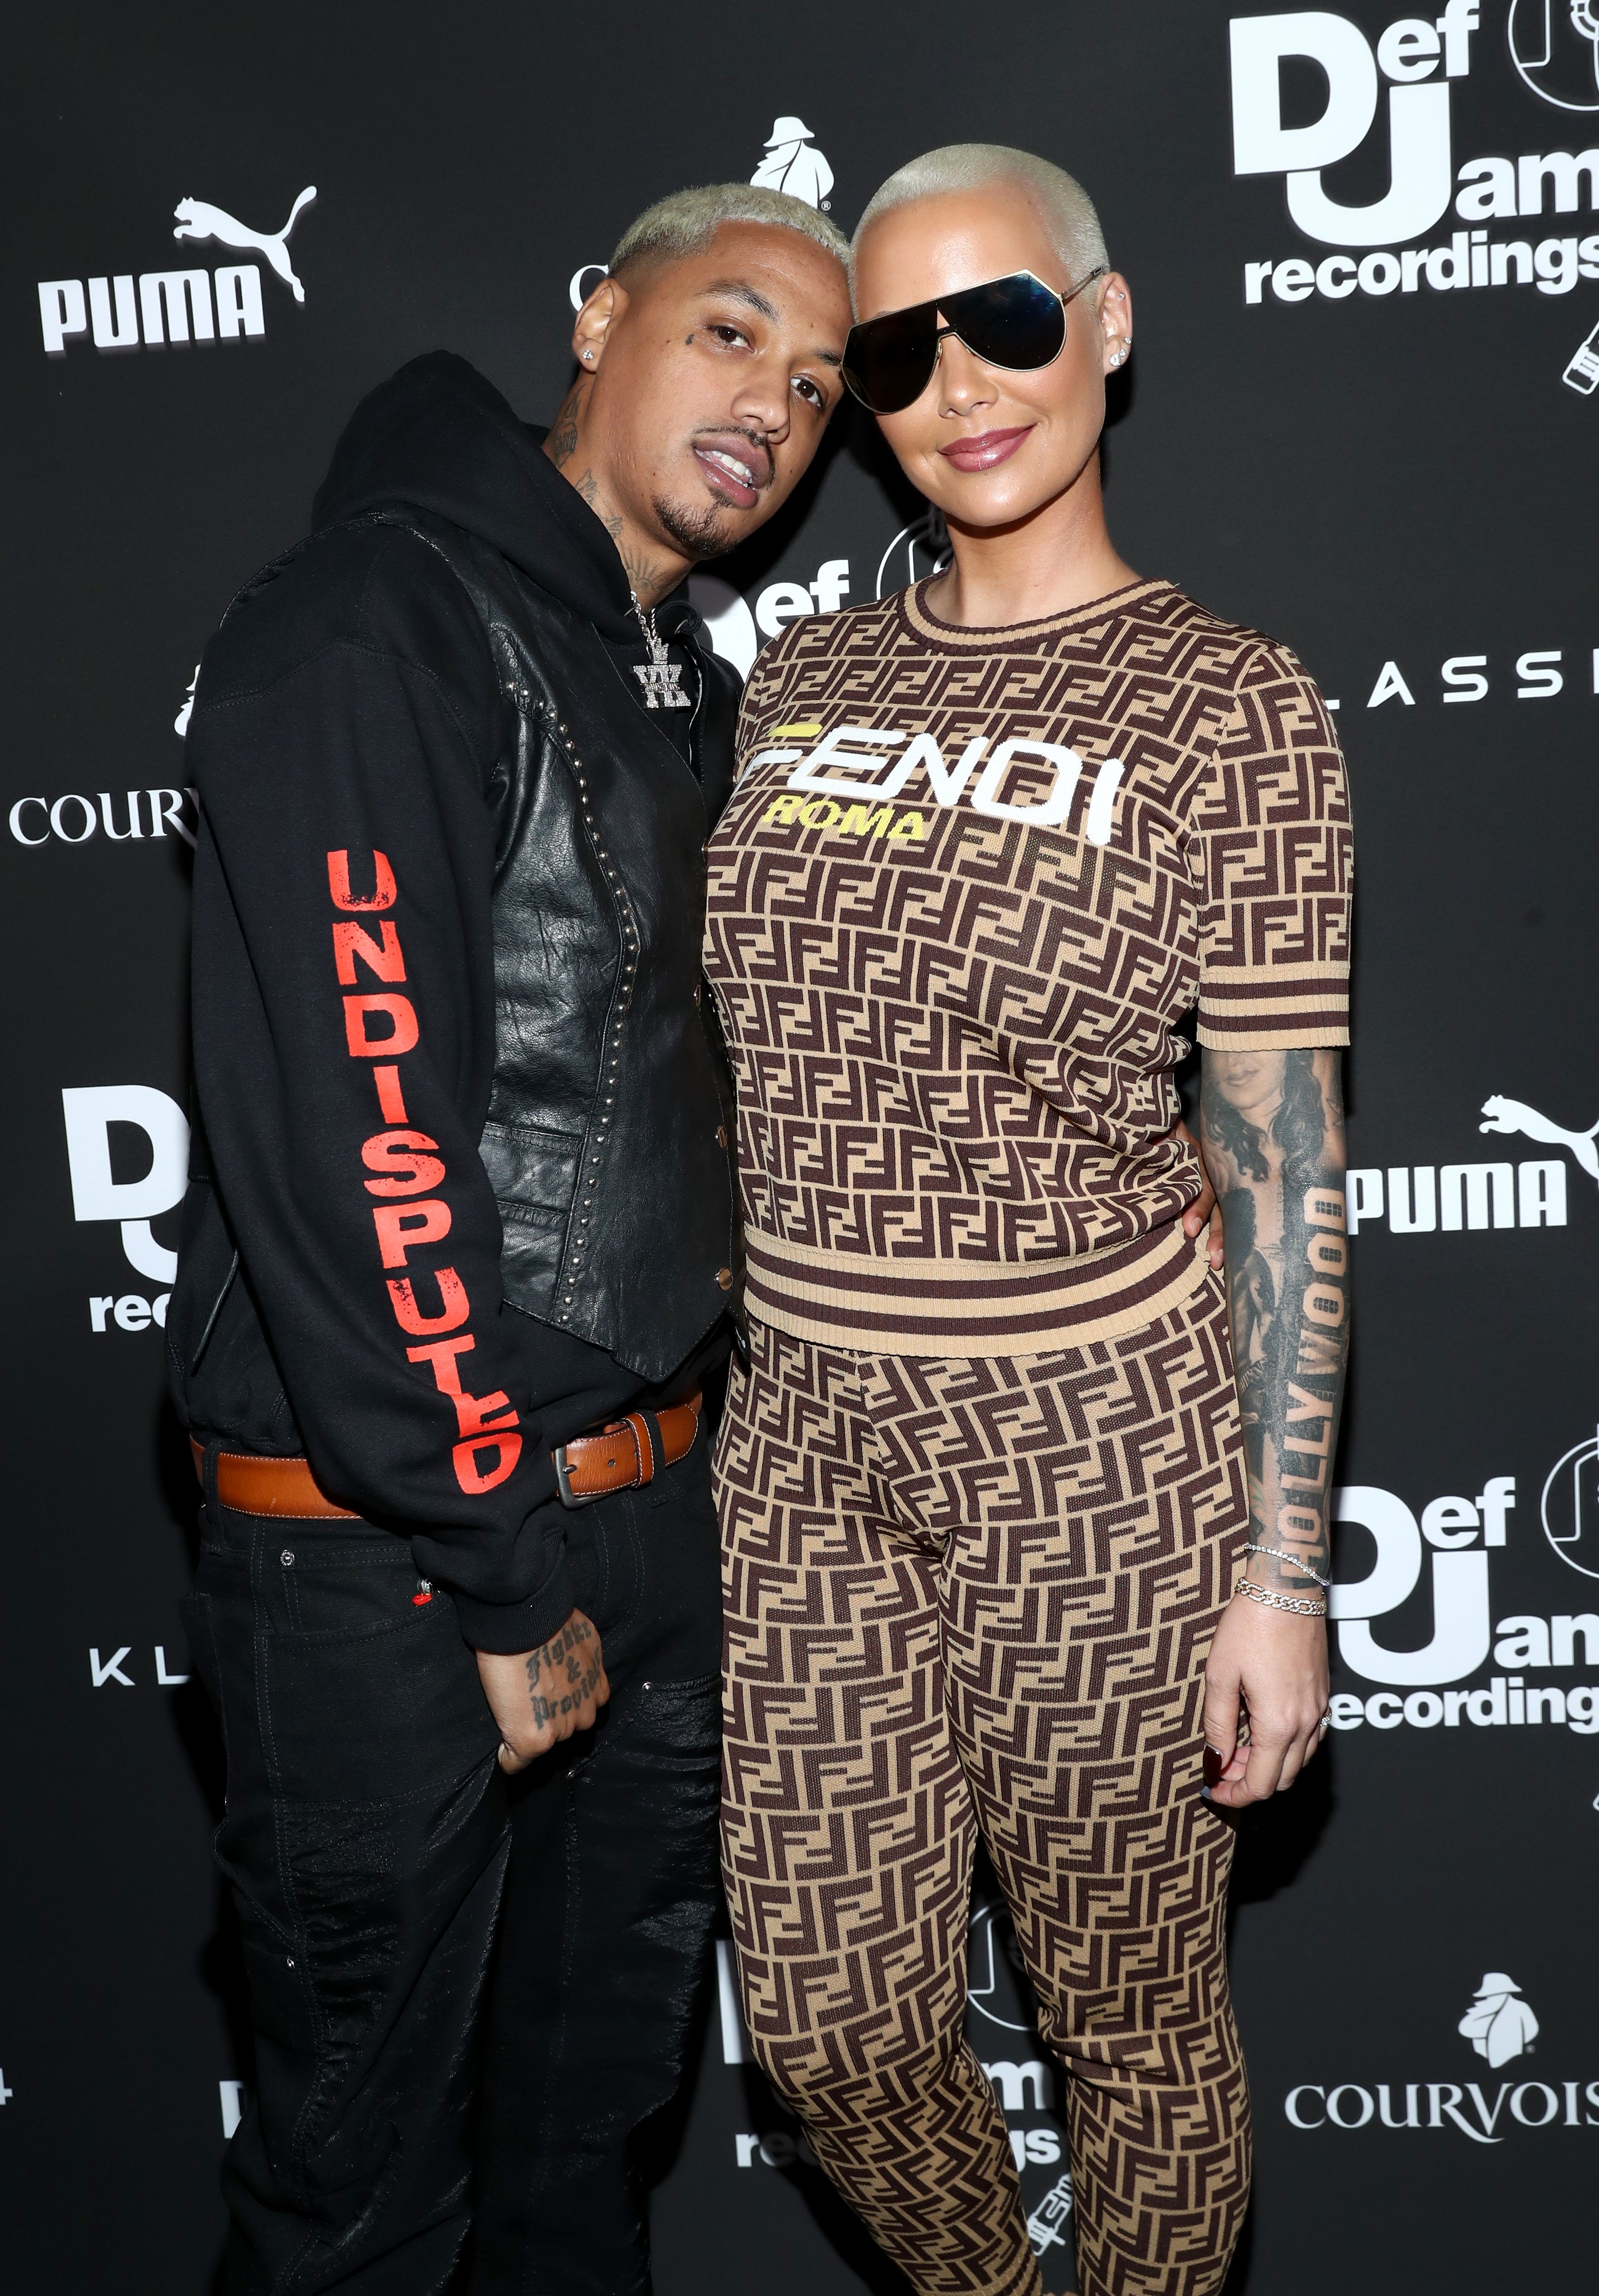 Alexander Edwards and Amber Rose attend the Def Jam Pre-Grammy 2019 party at Catch LA on February 08, 2019 in West Hollywood, California | Source: Getty Images